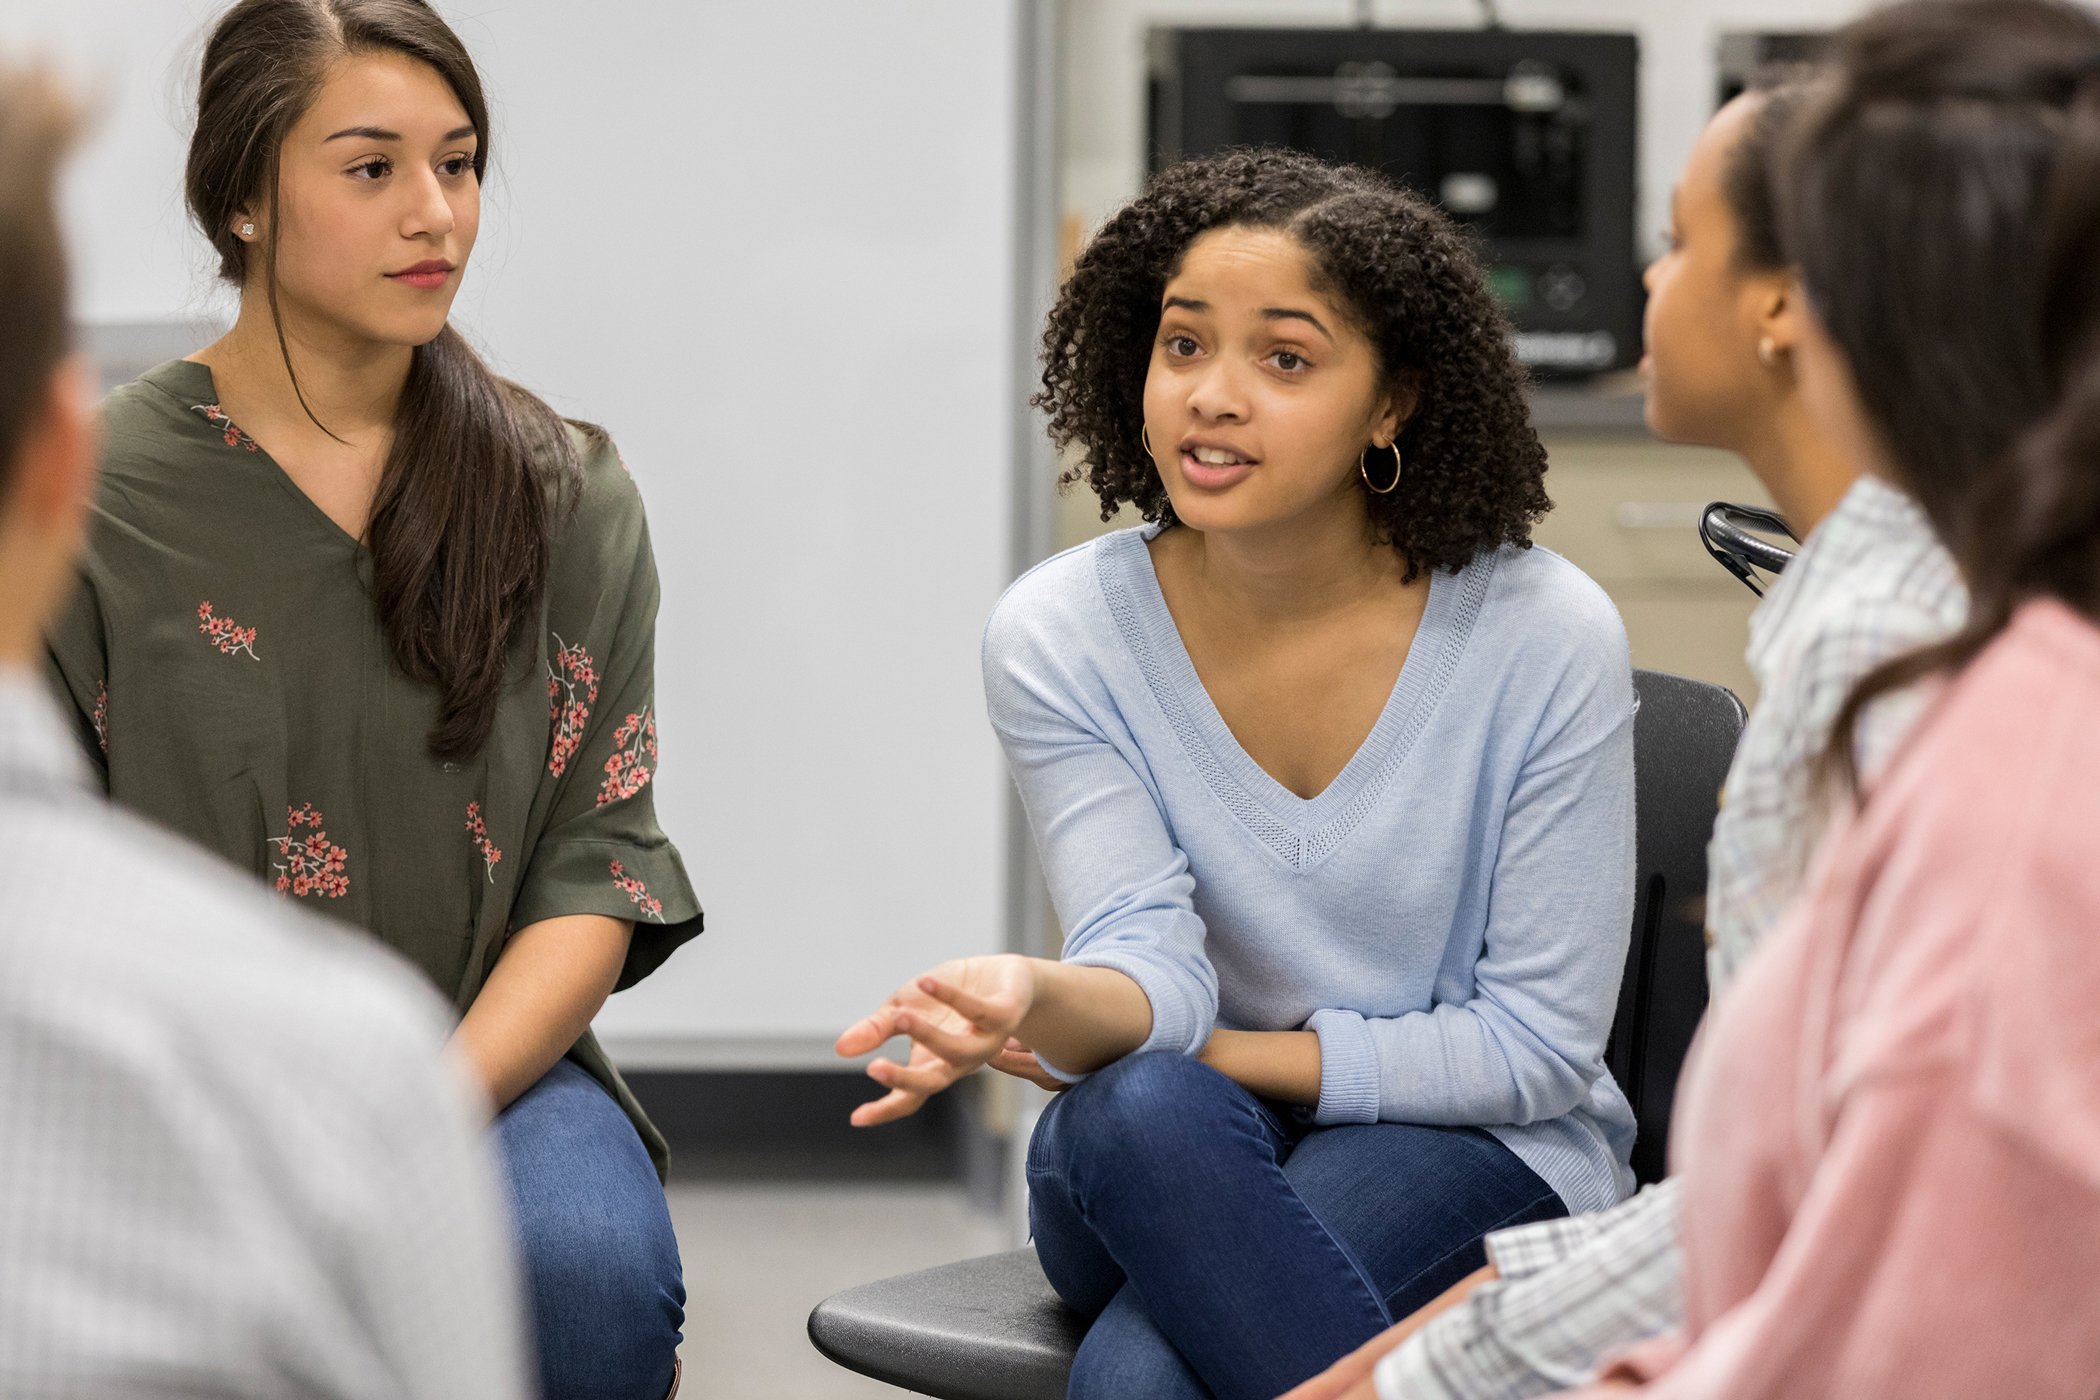 Teenage girl talks during group discussion of a diverse group of teens and adults